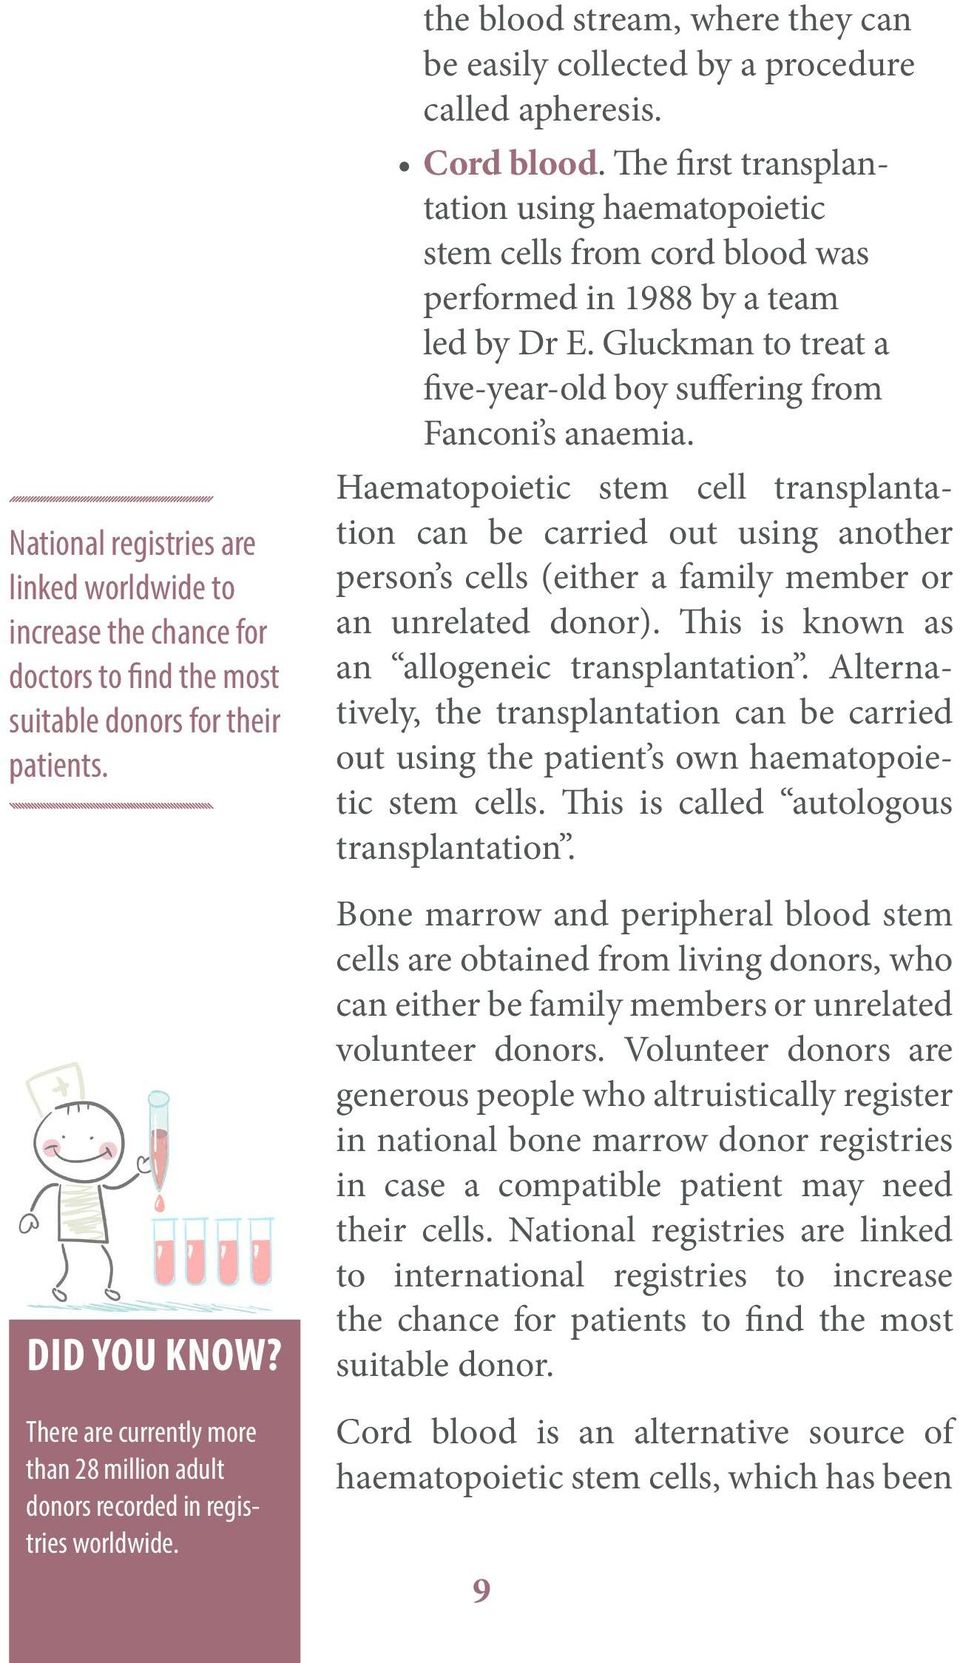 The first transplantation using haematopoietic stem cells from cord blood was performed in 1988 by a team led by Dr E. Gluckman to treat a five-year-old boy suffering from Fanconi s anaemia.